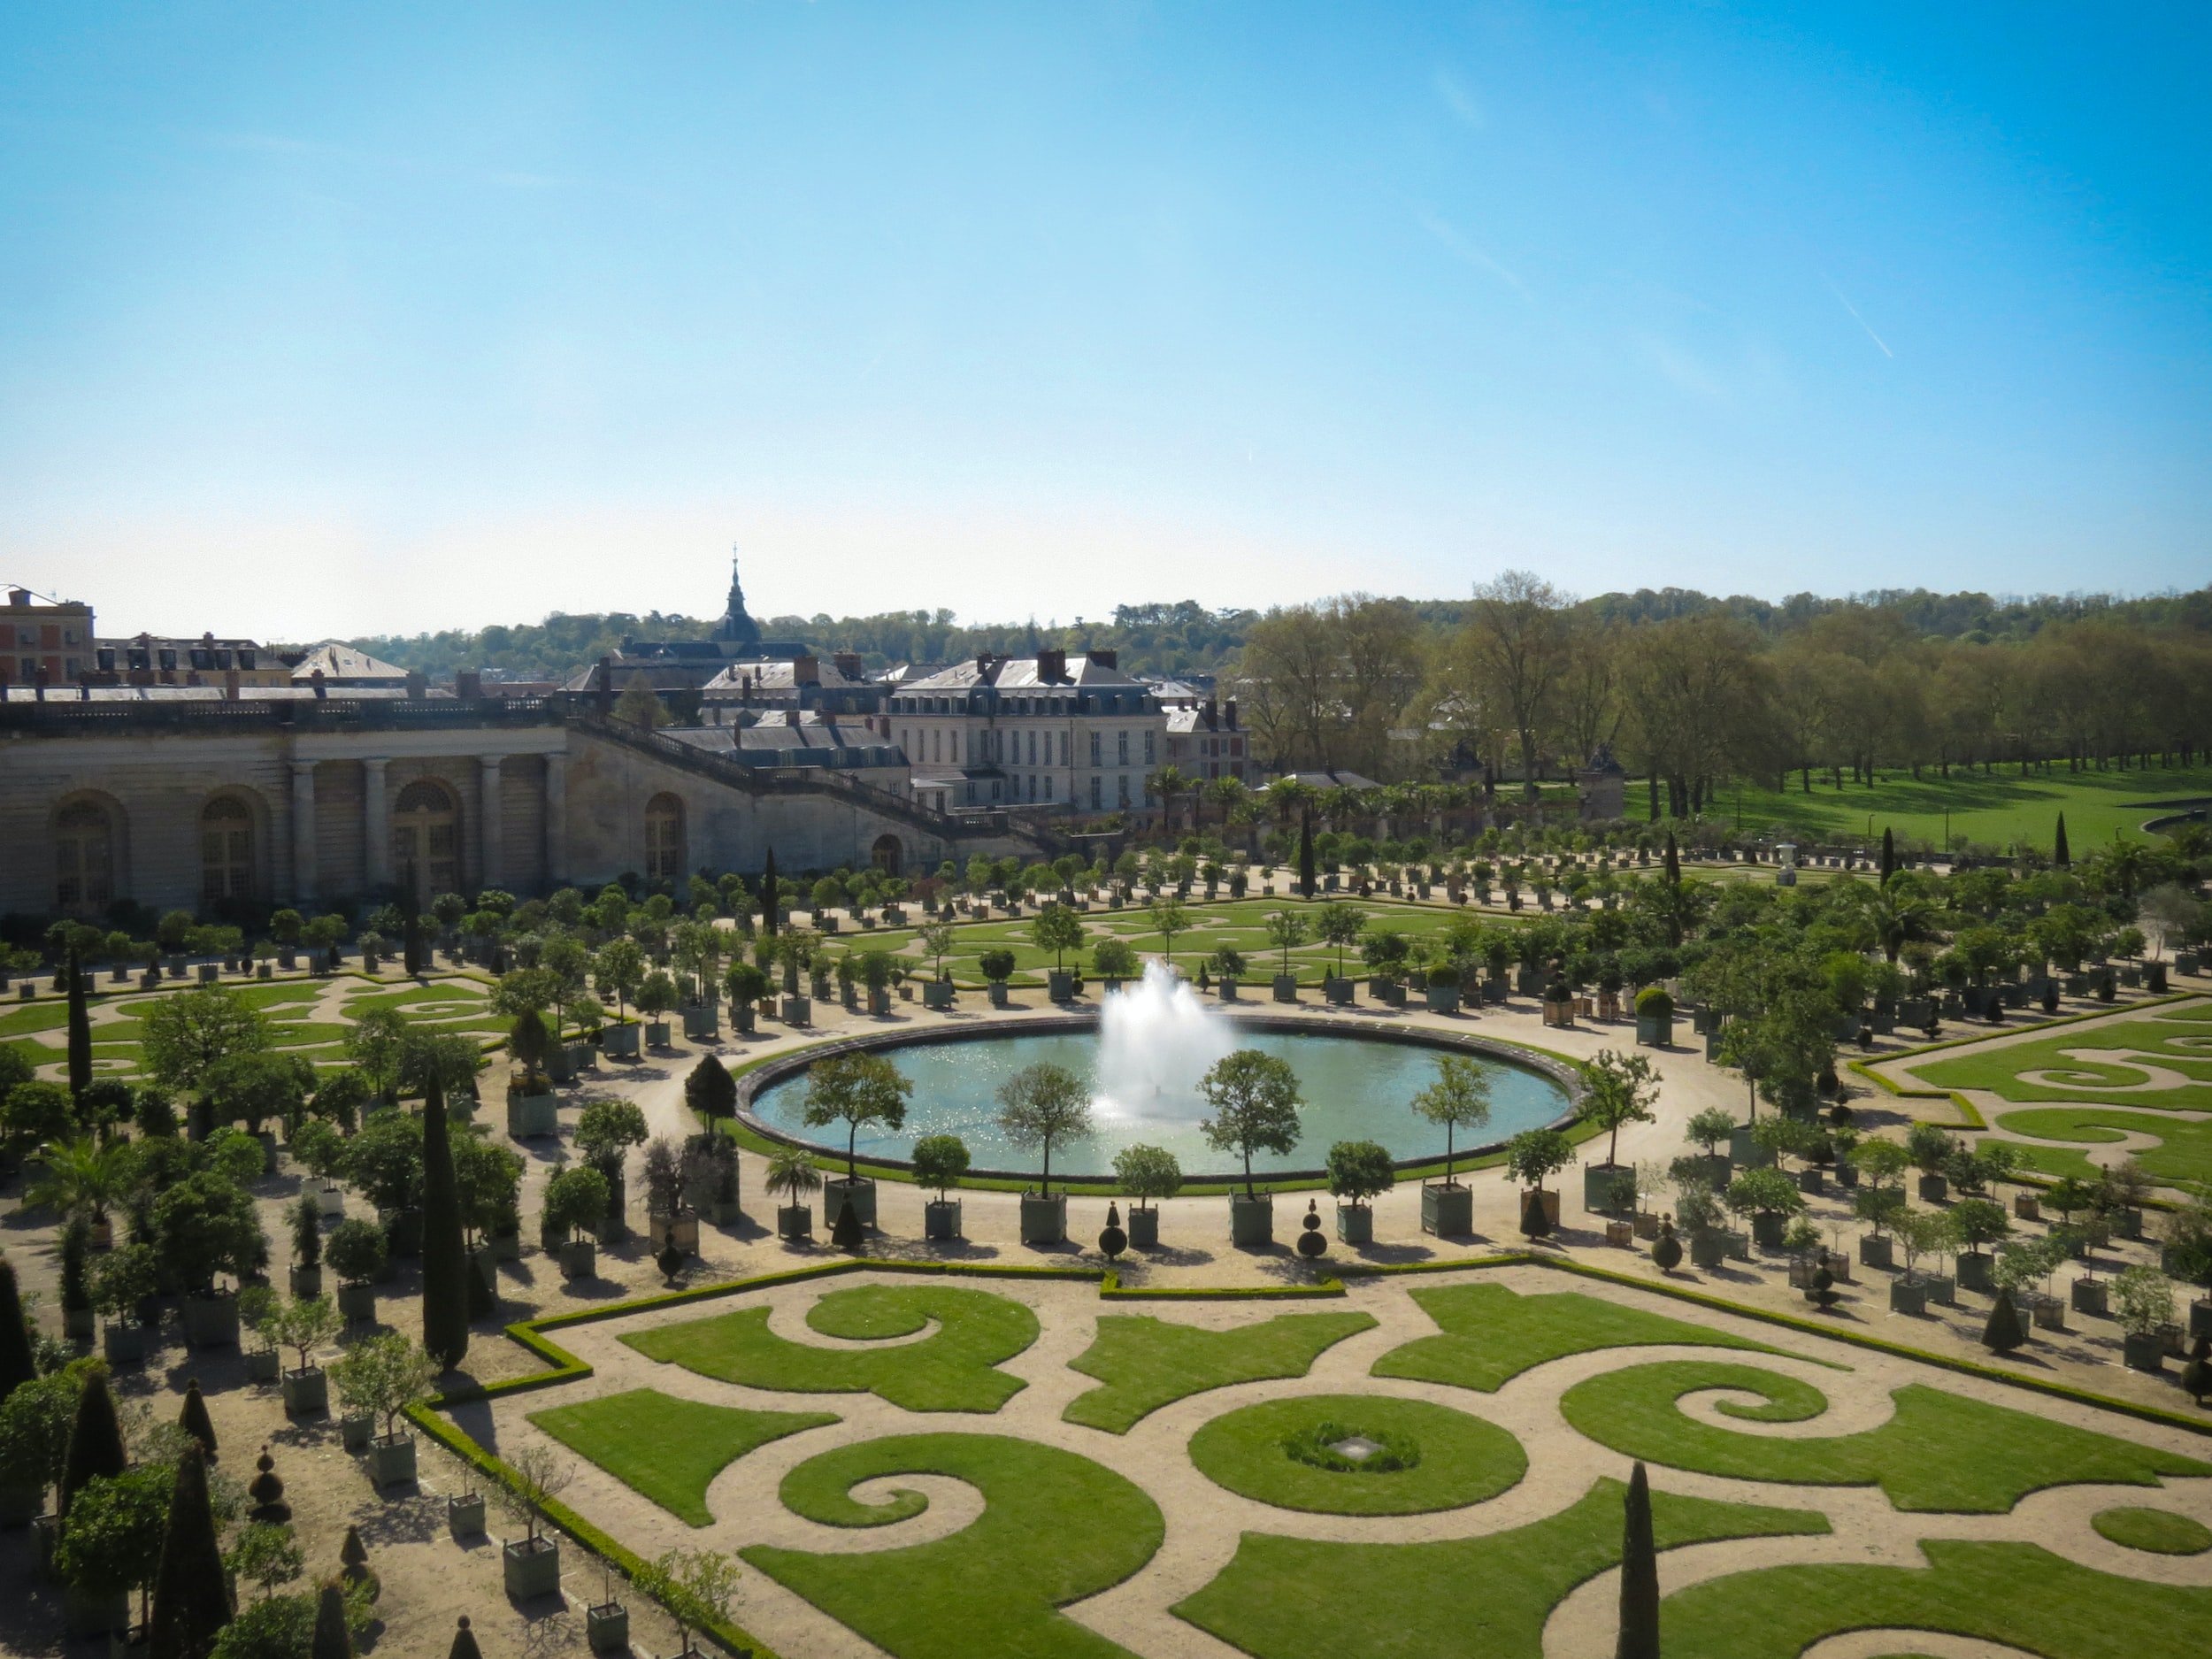 Palace and gardens of Versailles